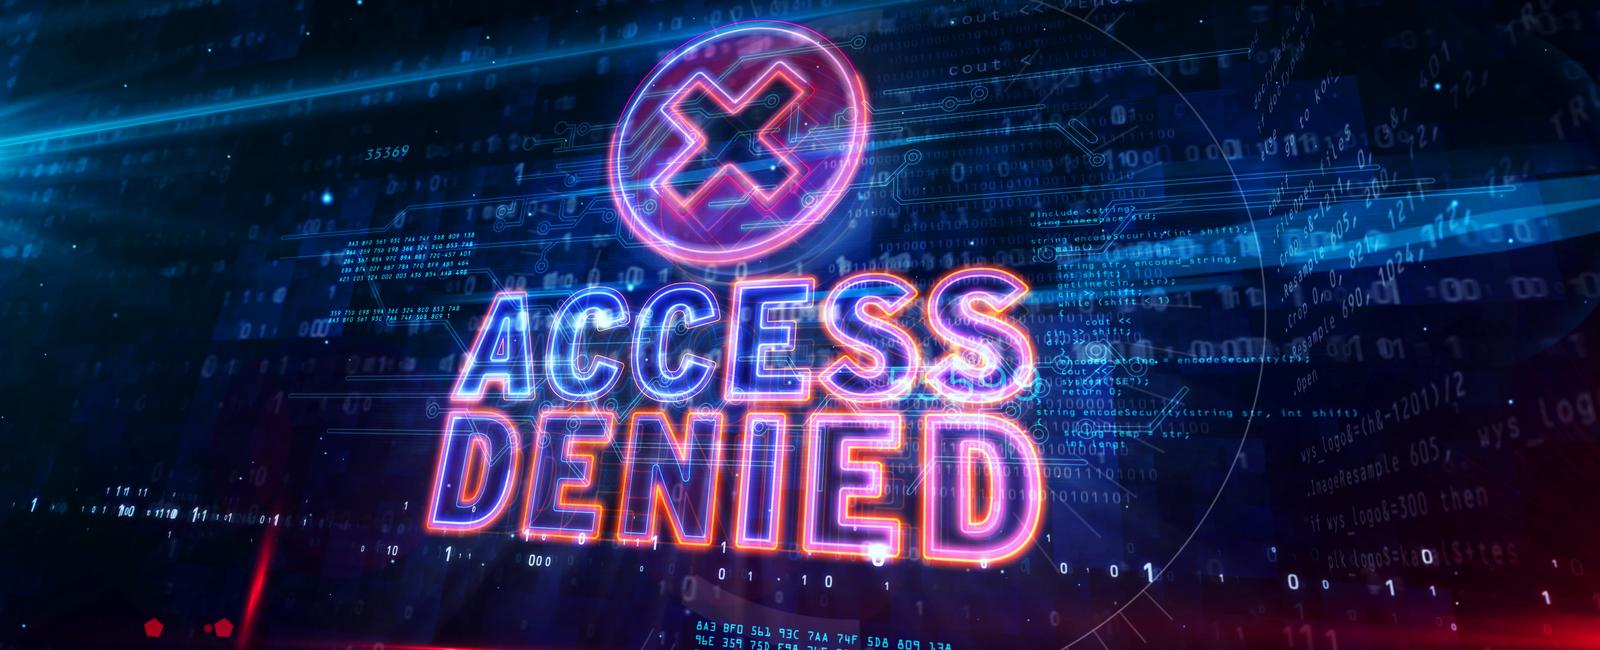 Getting Access Denied when trying to Approve a site Access Request